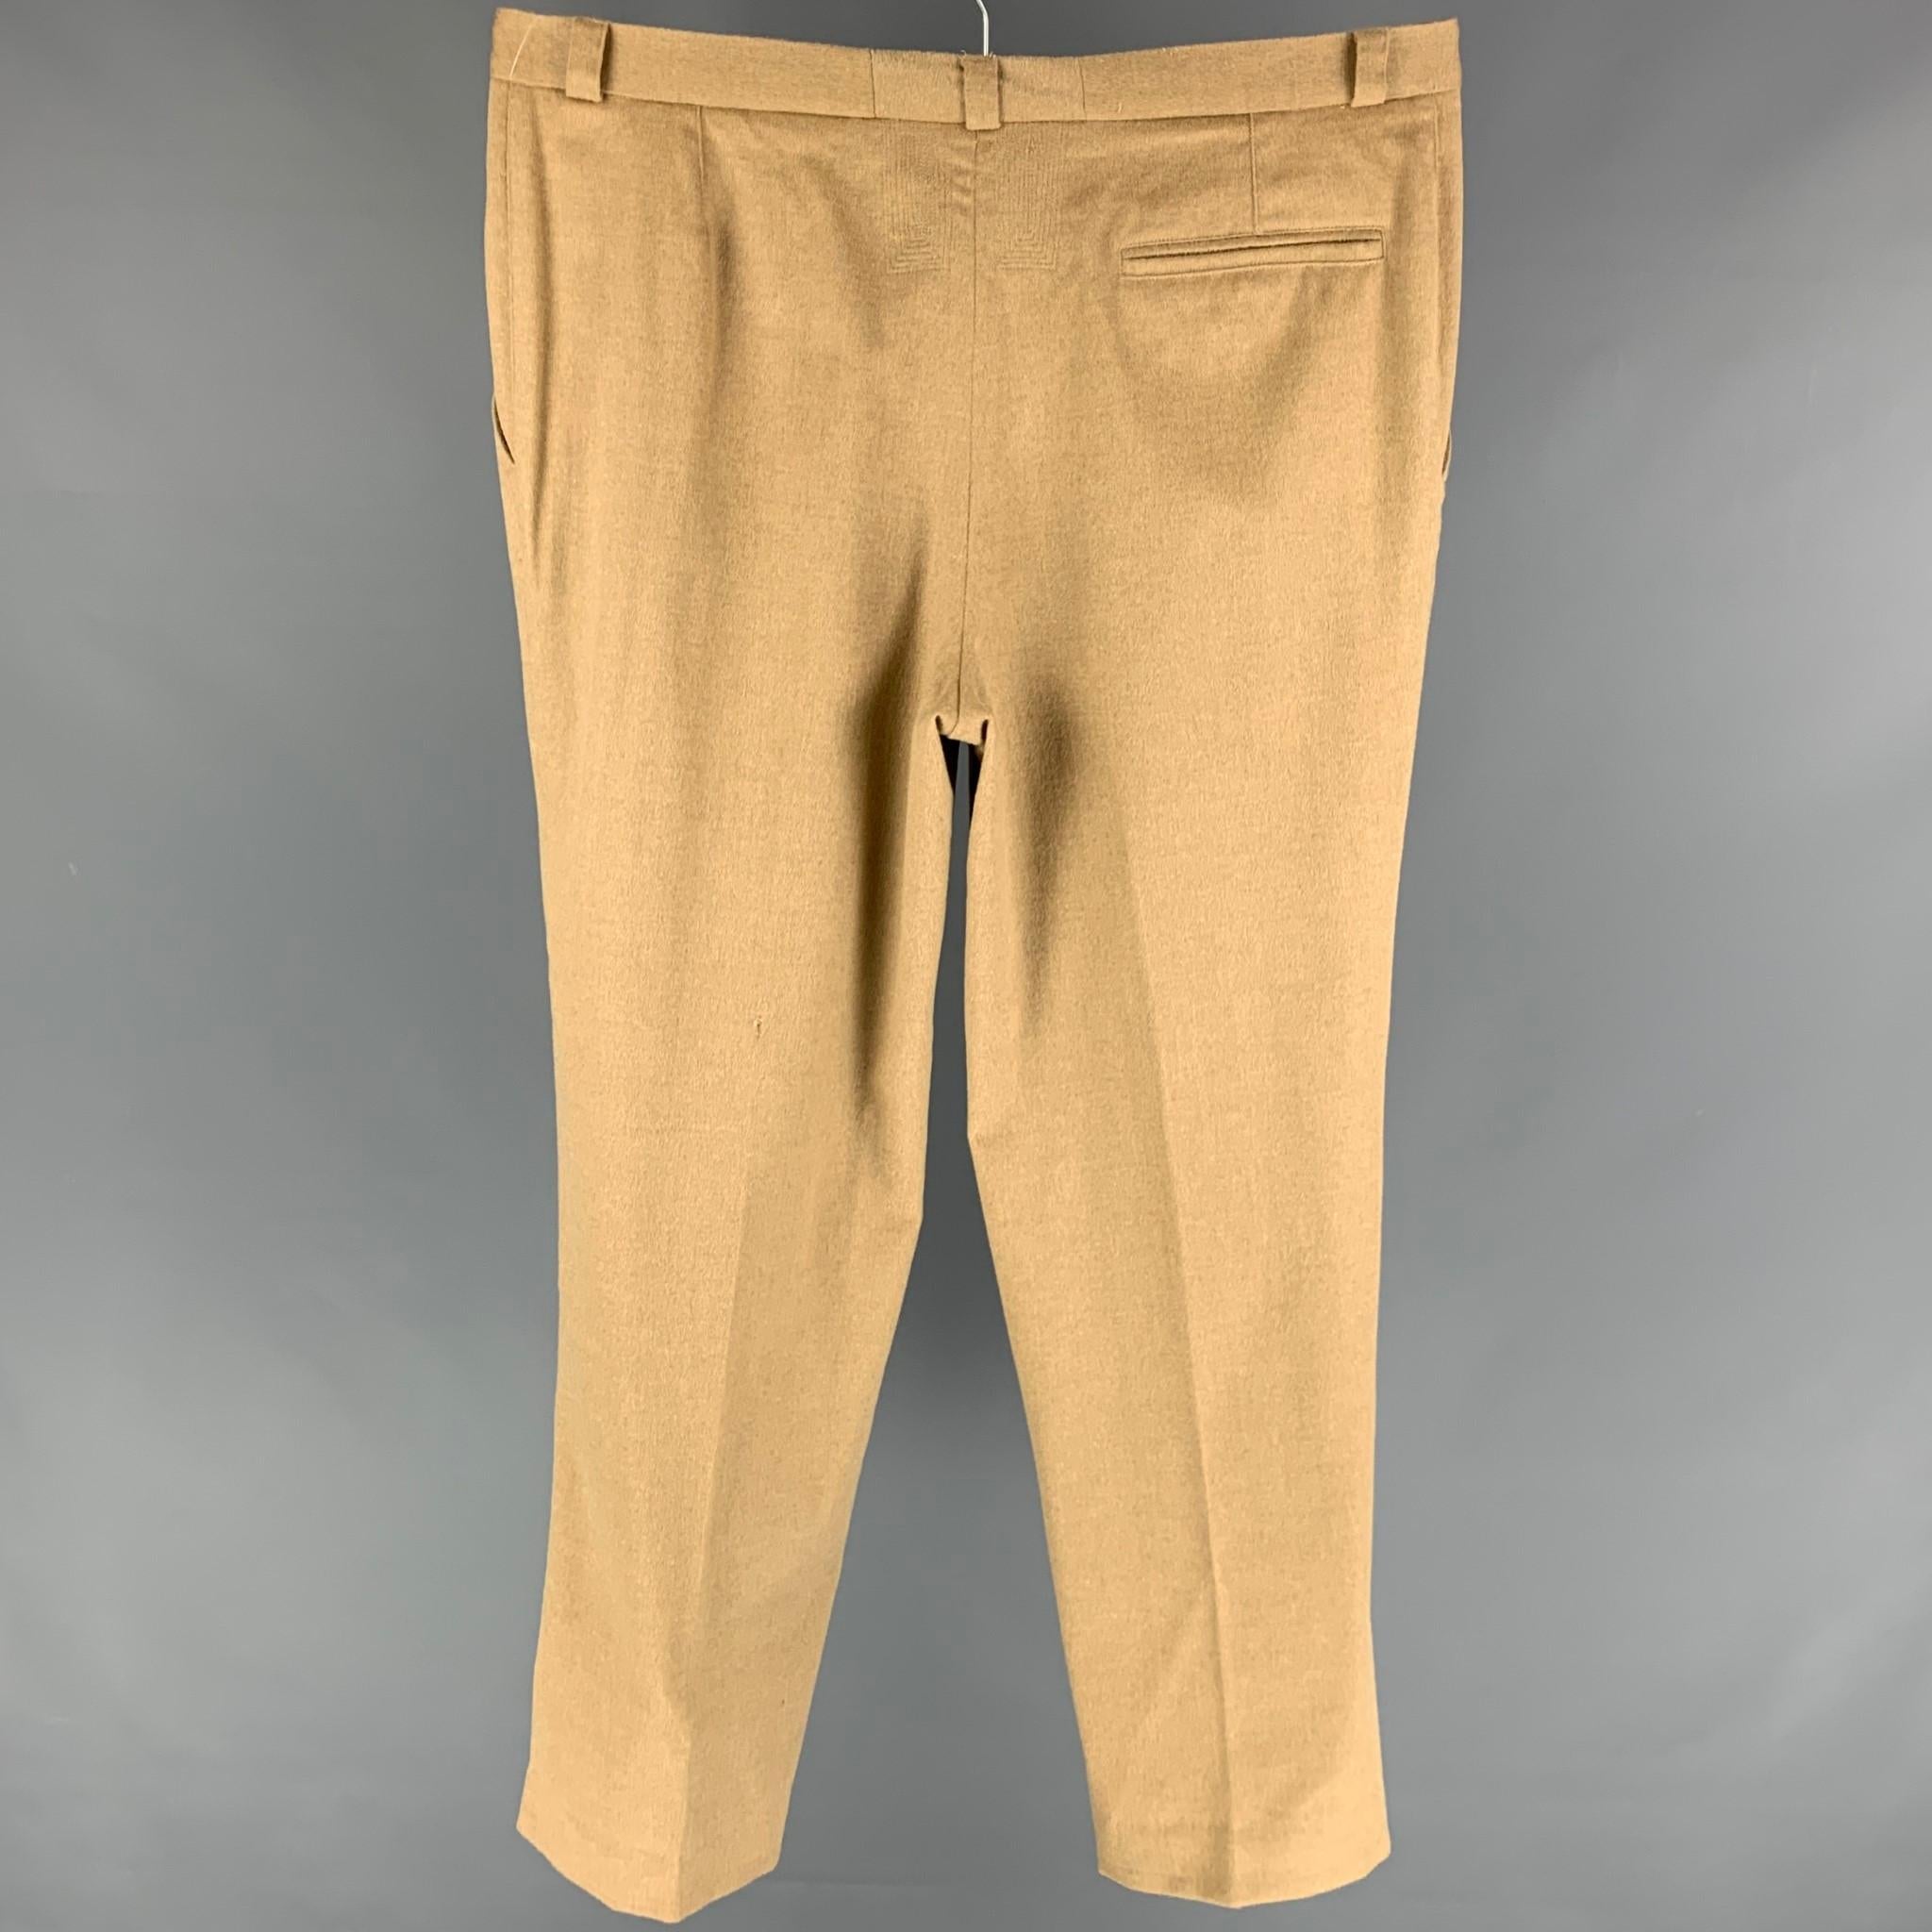 Vintage GIANNI VERSACE dress pants comes in a tan angora wool featuring a pleated style, loose fit, and a zip fly closure. 

Good Pre-Owned Condition.
Marked: 50

Measurements:

Waist: 38 in.
Rise: 12.5 in.
Inseam: 32 in. 